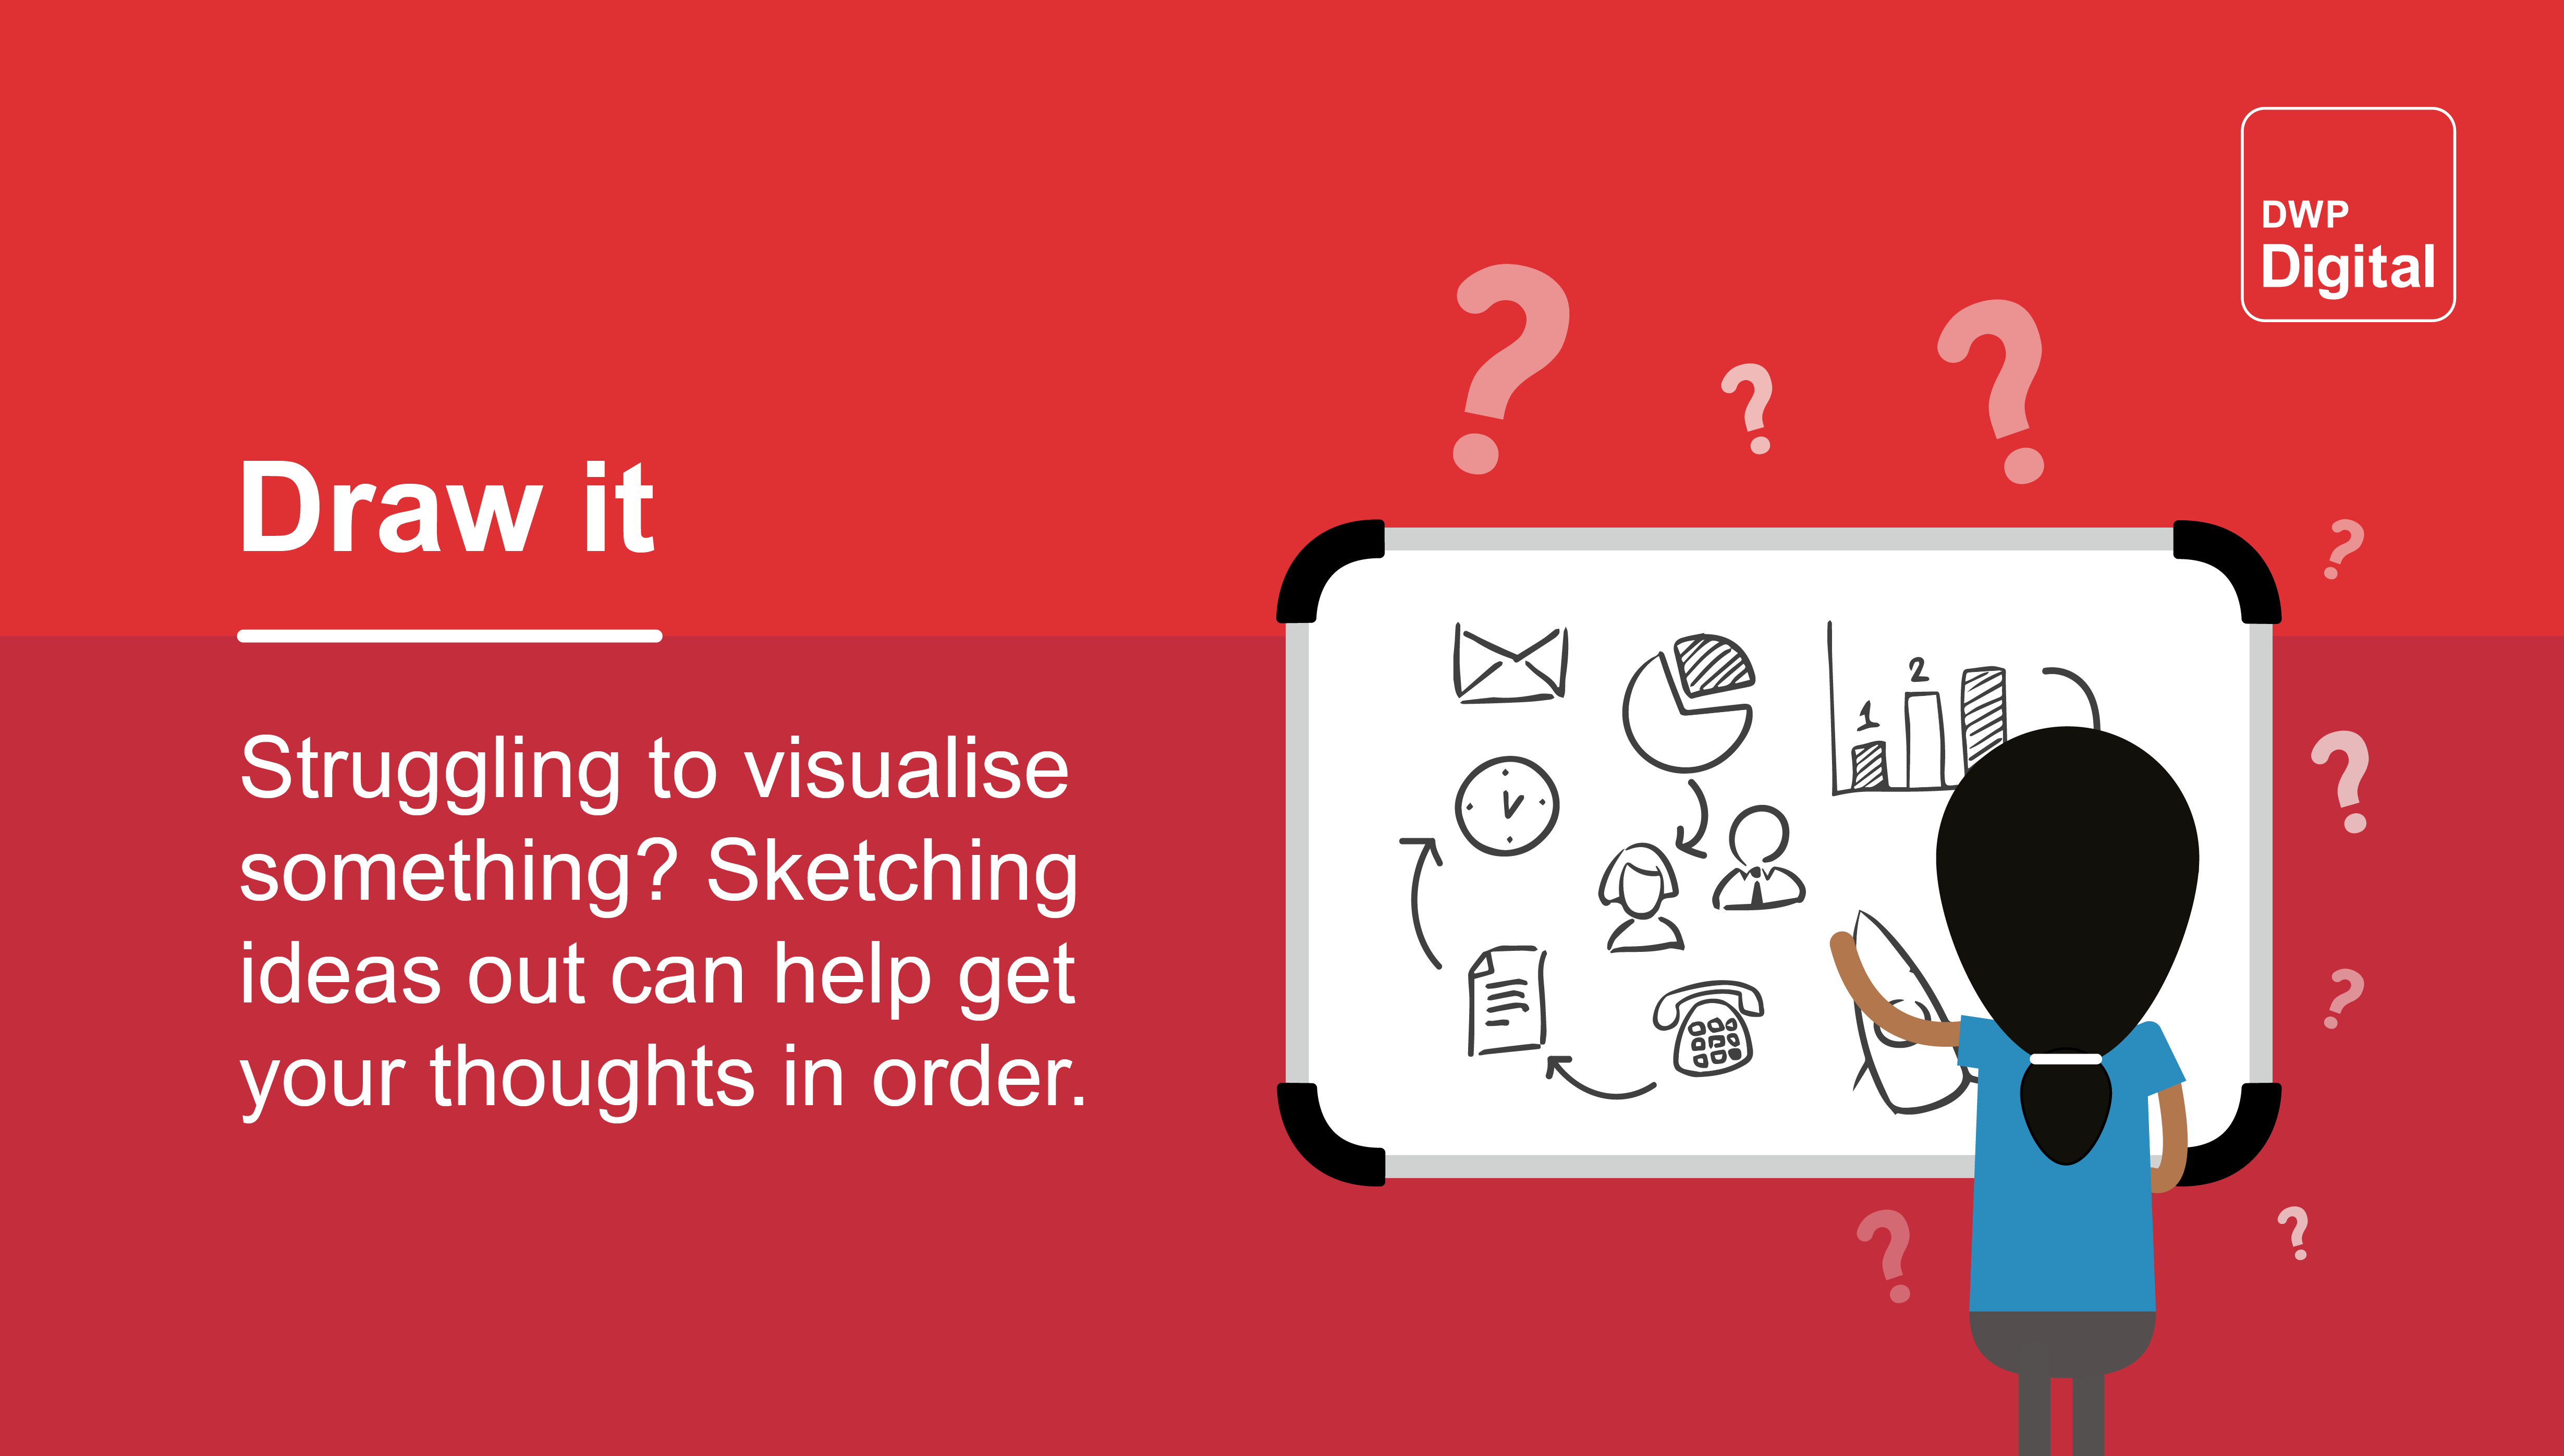 Graphic showing a person sketching stick figures and graphs on a large whiteboard, with the text: "Struggling to visualise something? Sketching ideas can help get your thoughts in order."